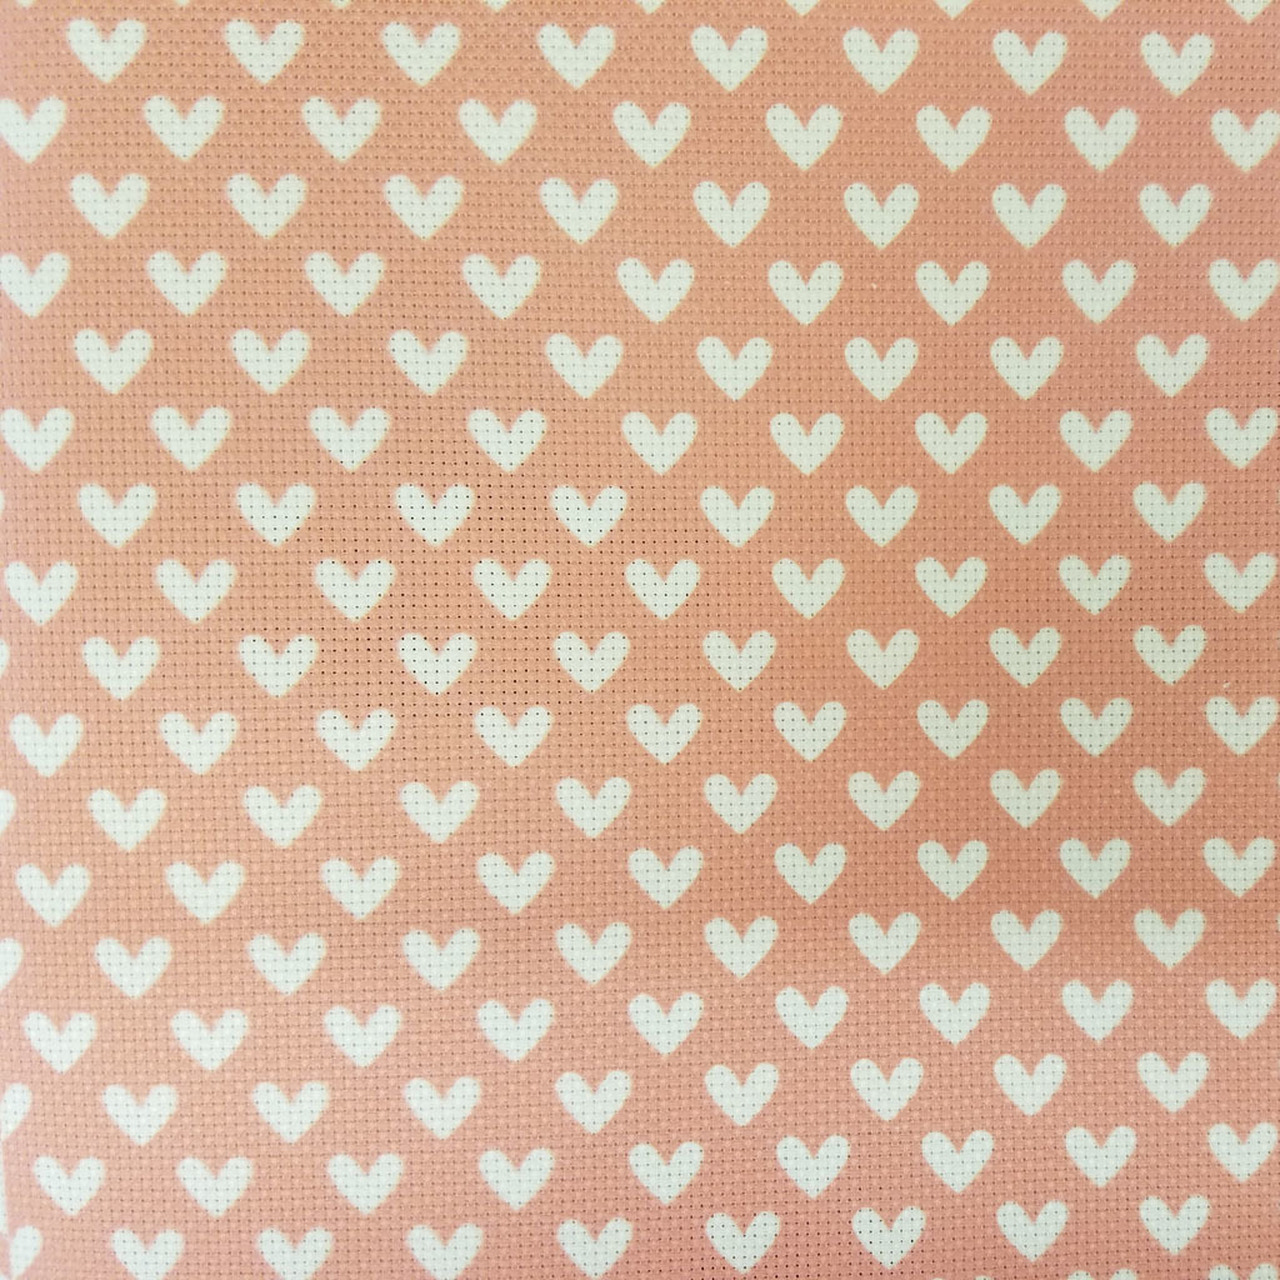 White Hearts On Red Patterned Cross Stitch Fabric